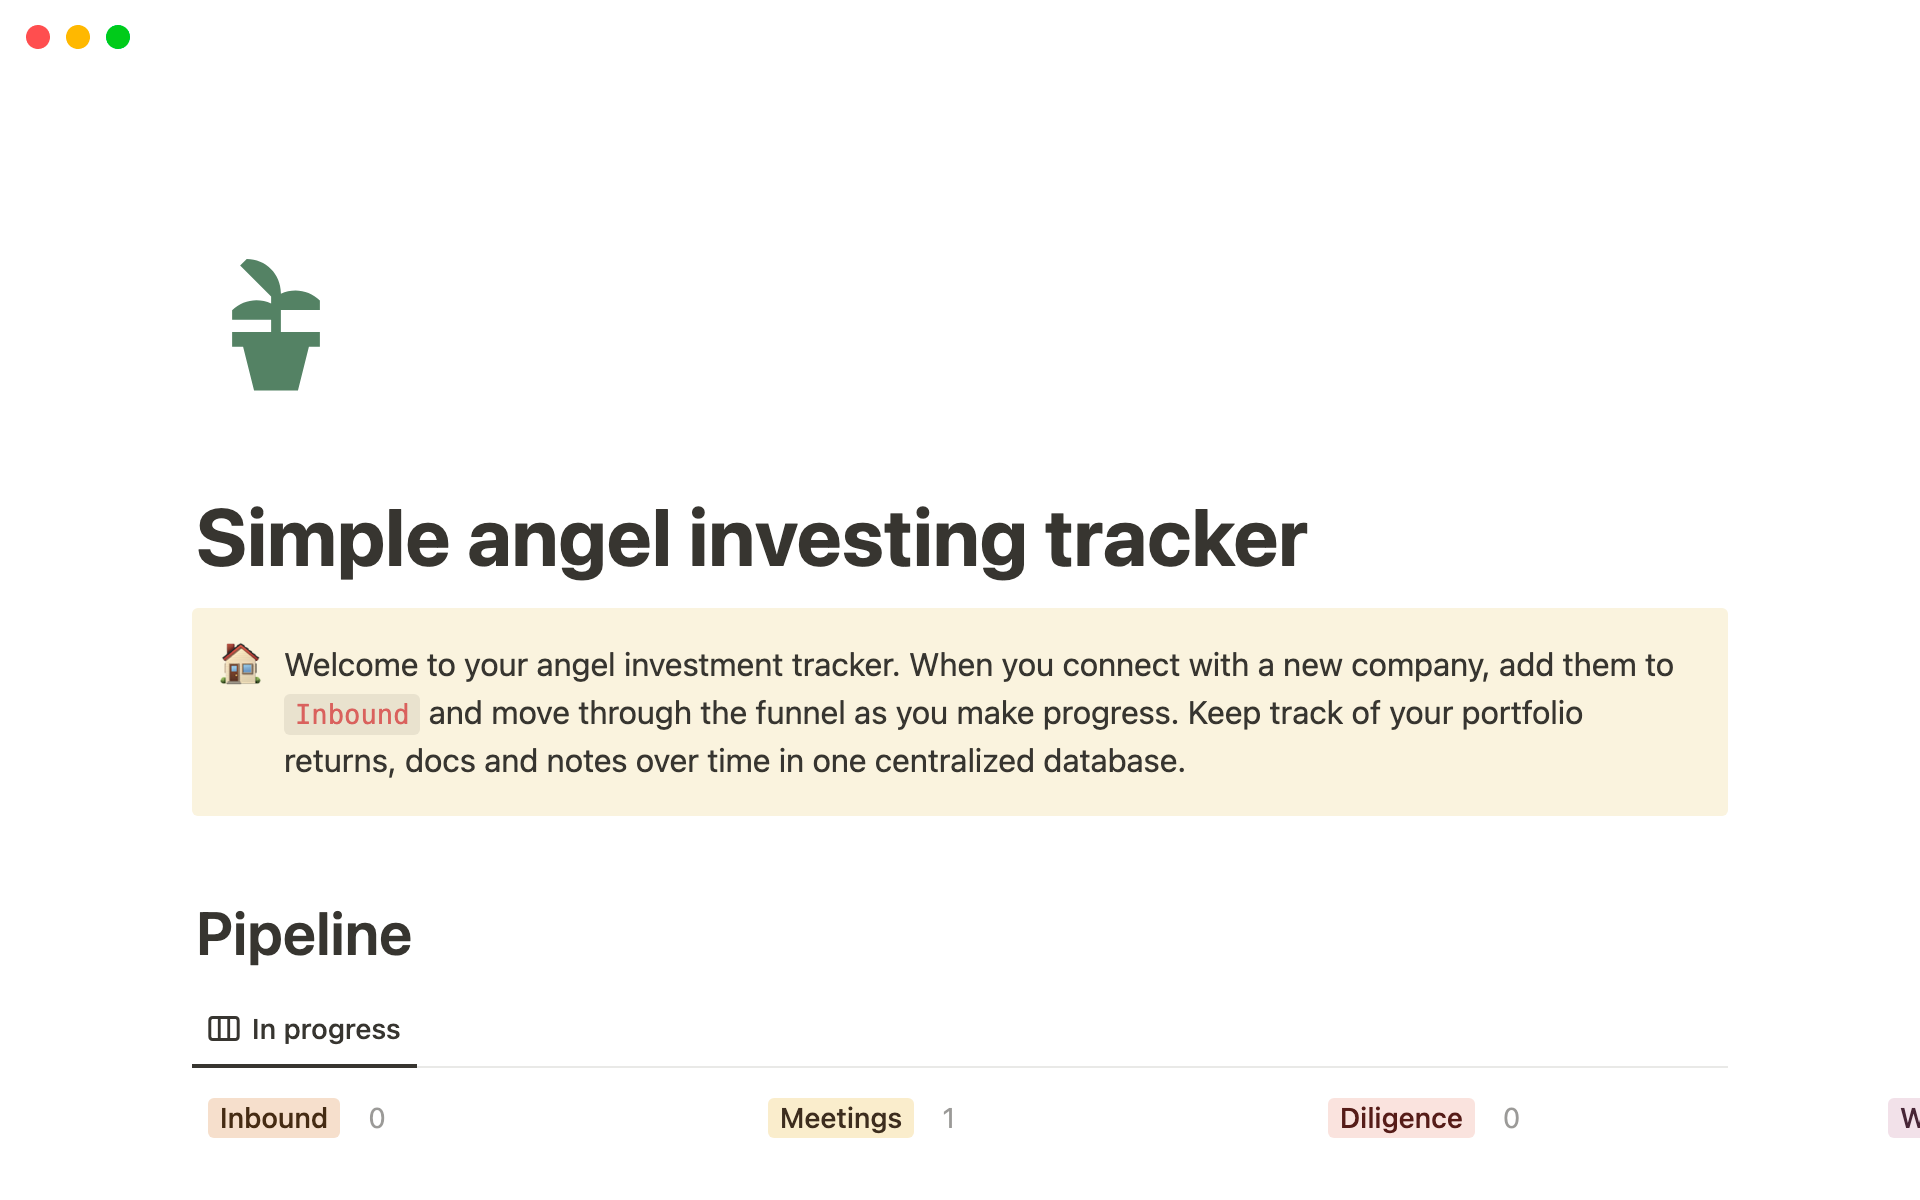 One simple Notion page to keep track of your angel investing pipeline and portfolio.